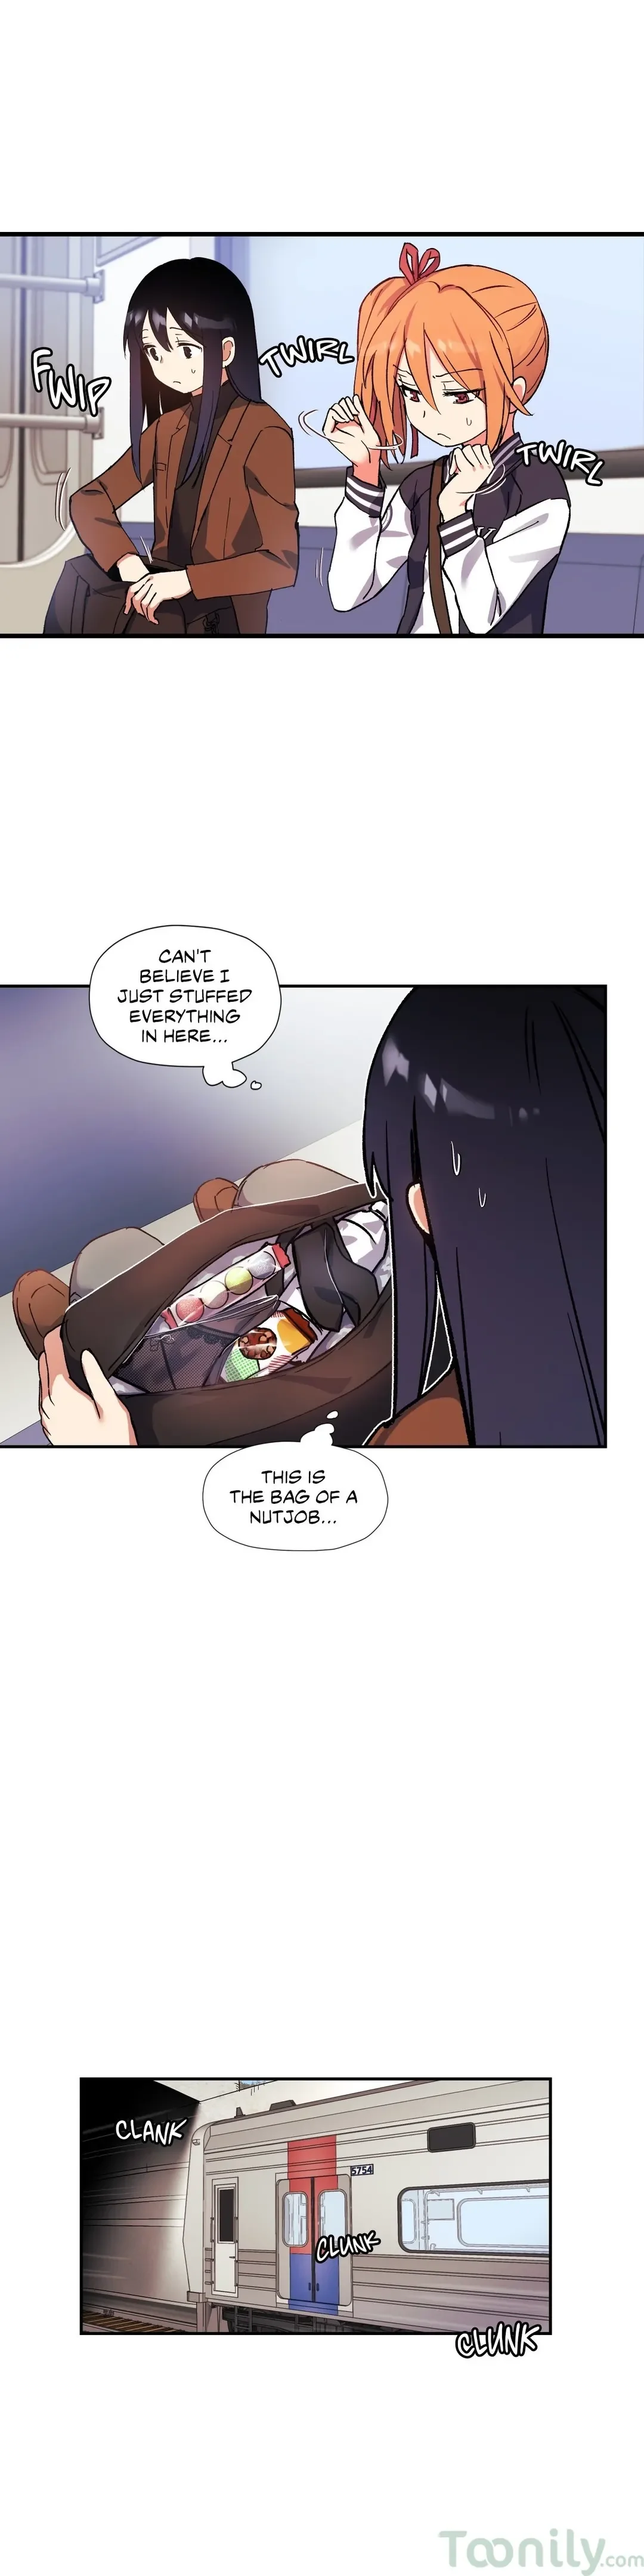 under-observation-my-first-loves-and-i-chap-41-22